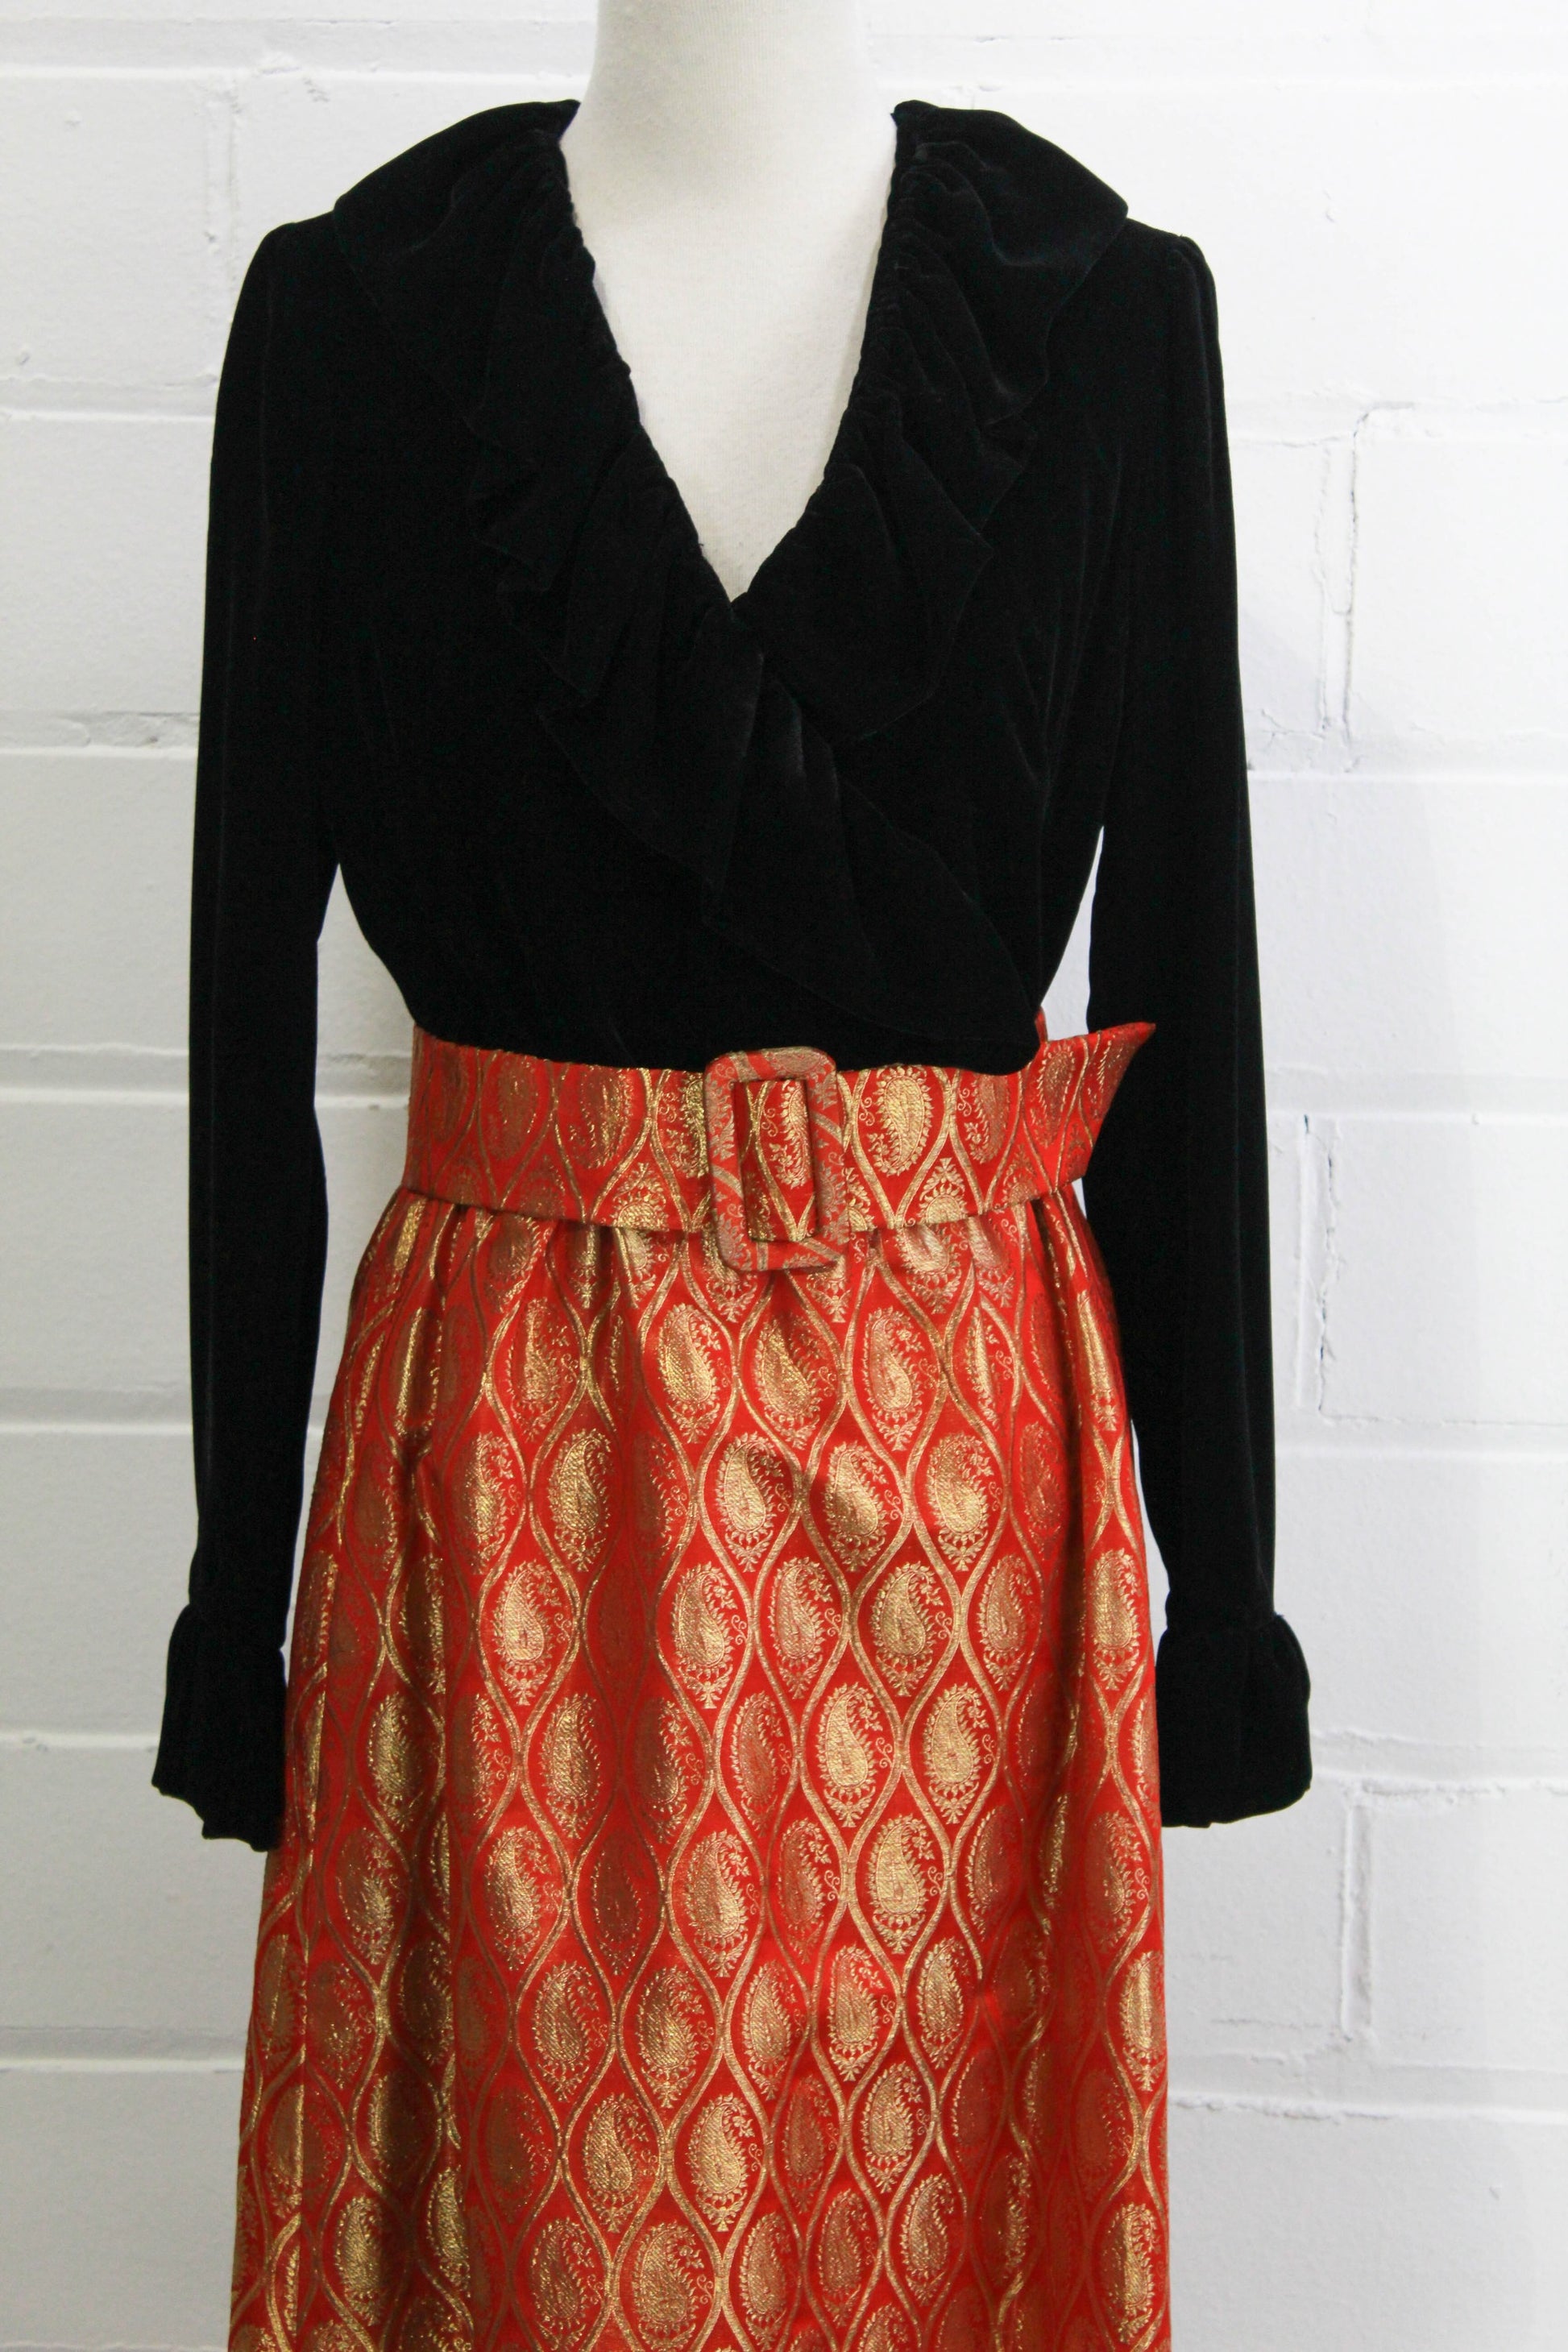 1970s maxi dress black velvet with red and gold metallic brocade skirt, ruffle collar close up front